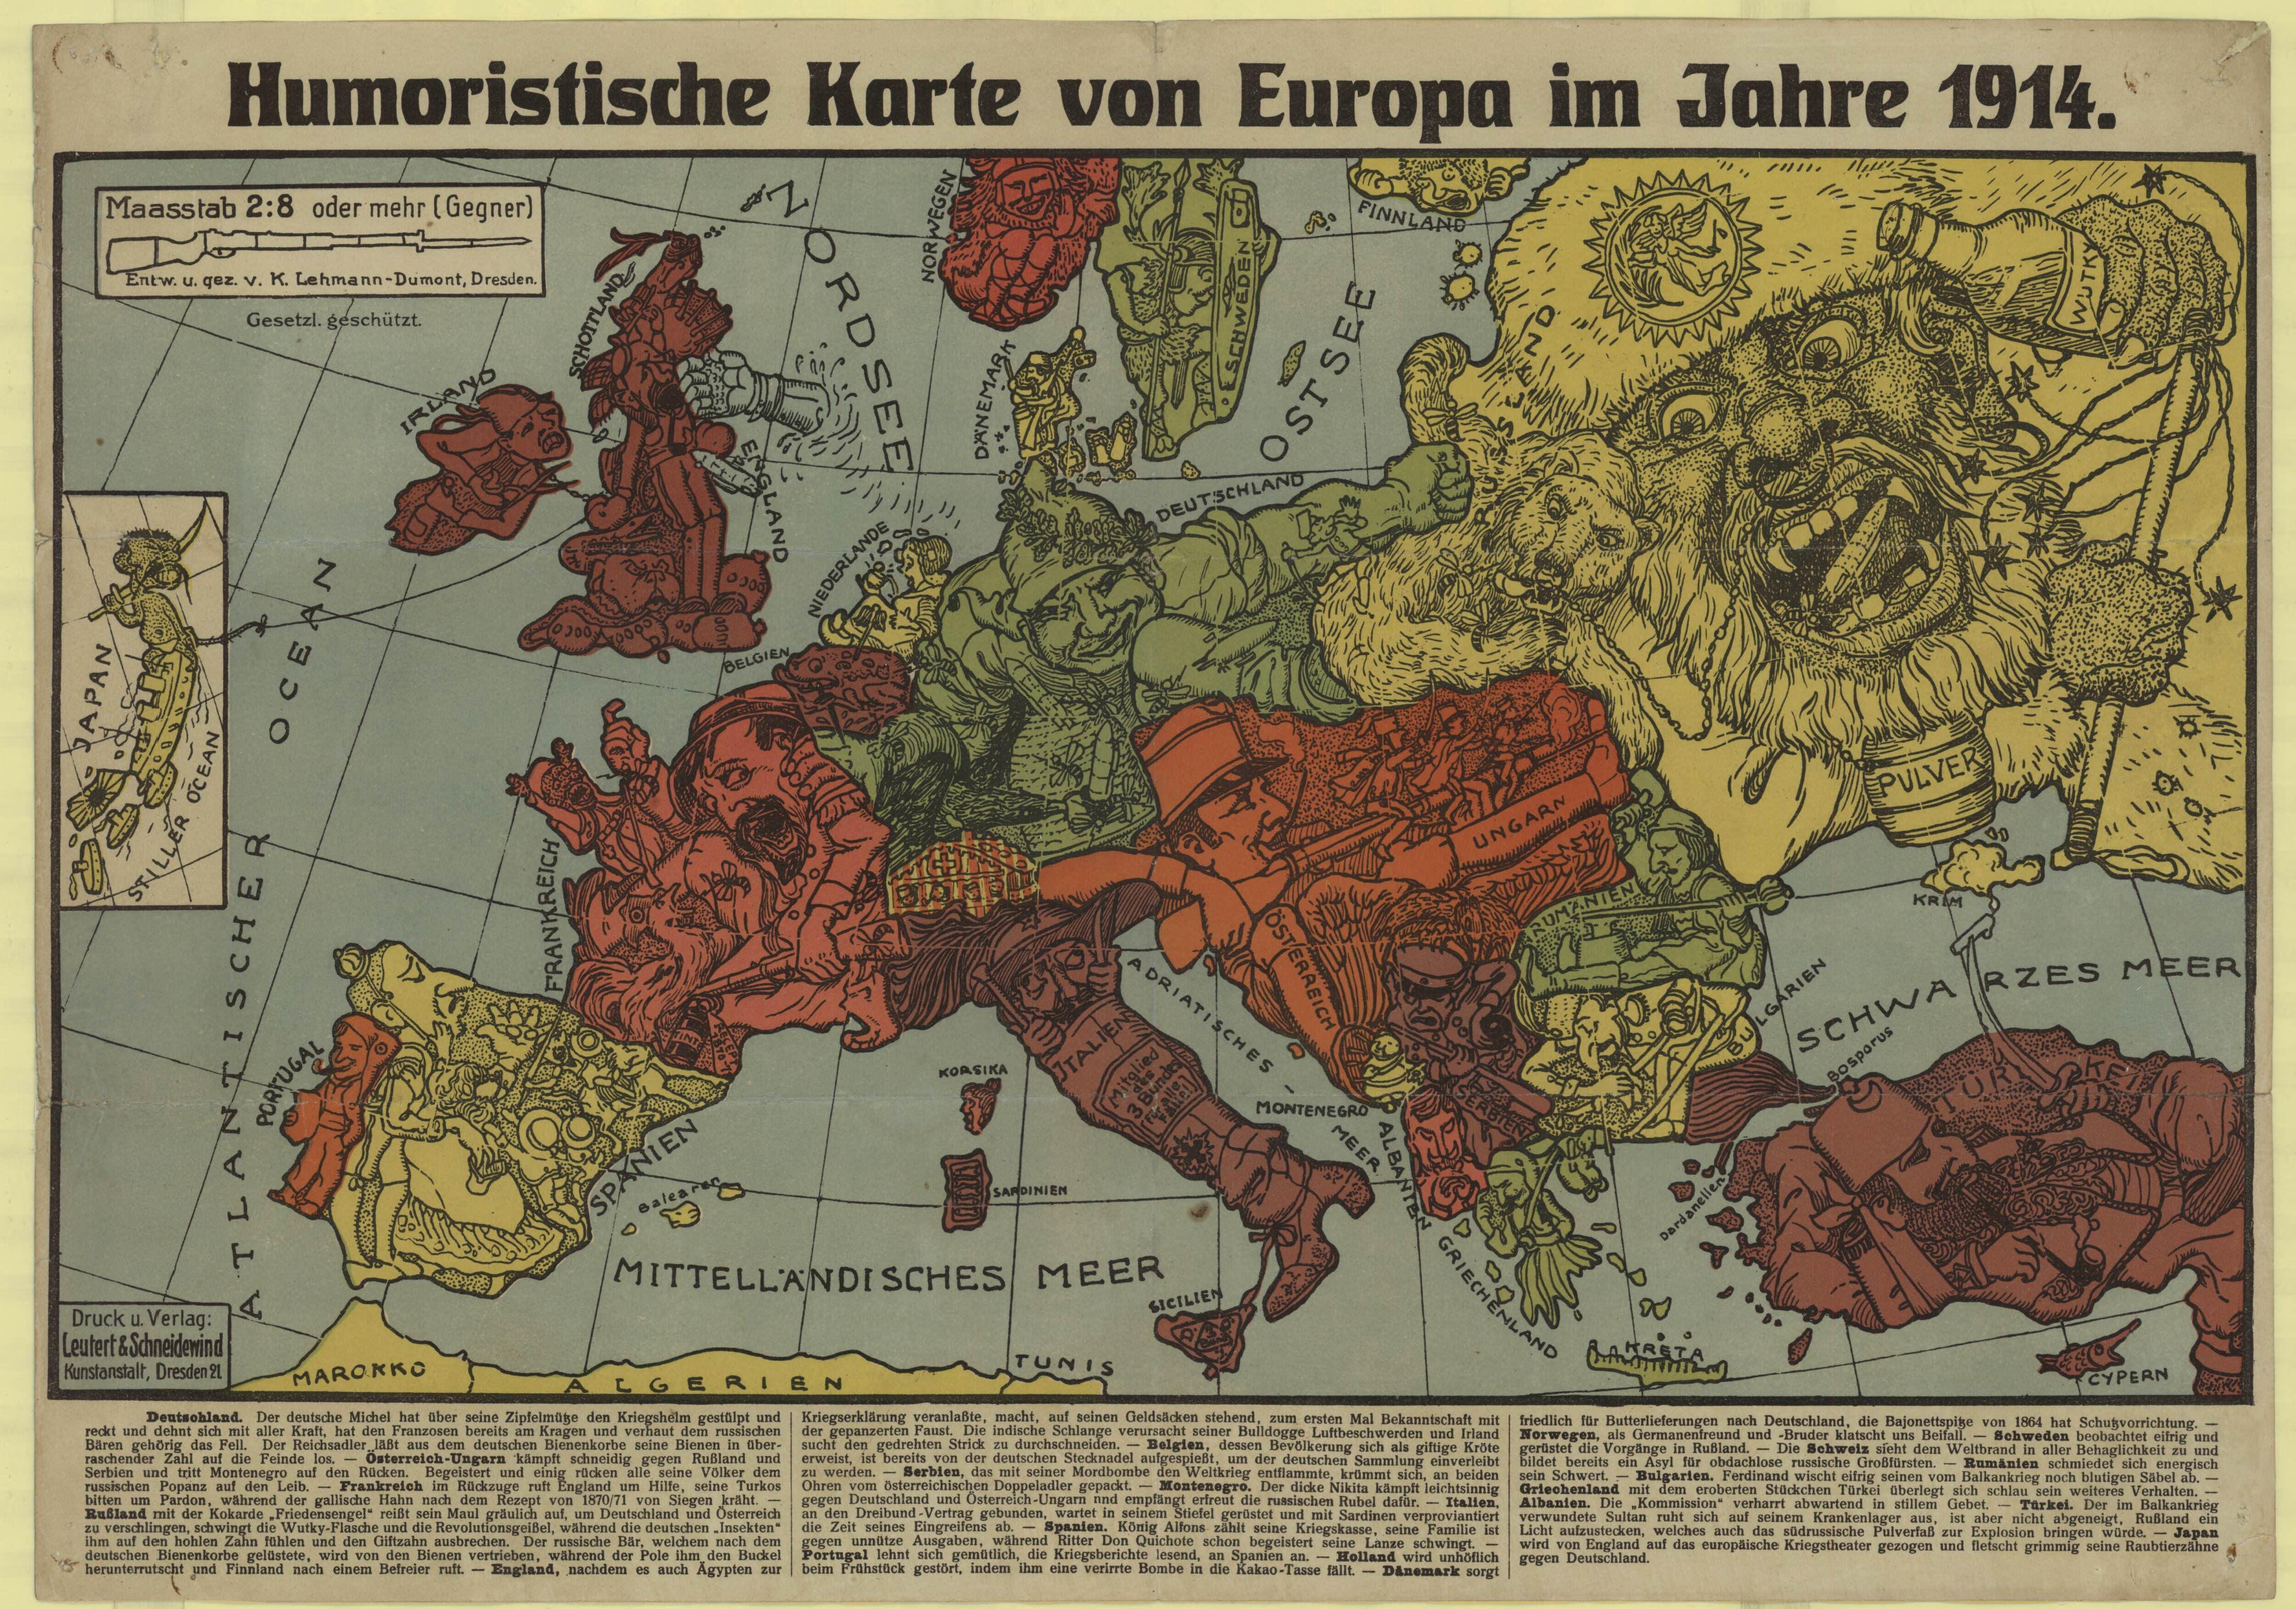 German caricature map of Europe on the brink of World War 1